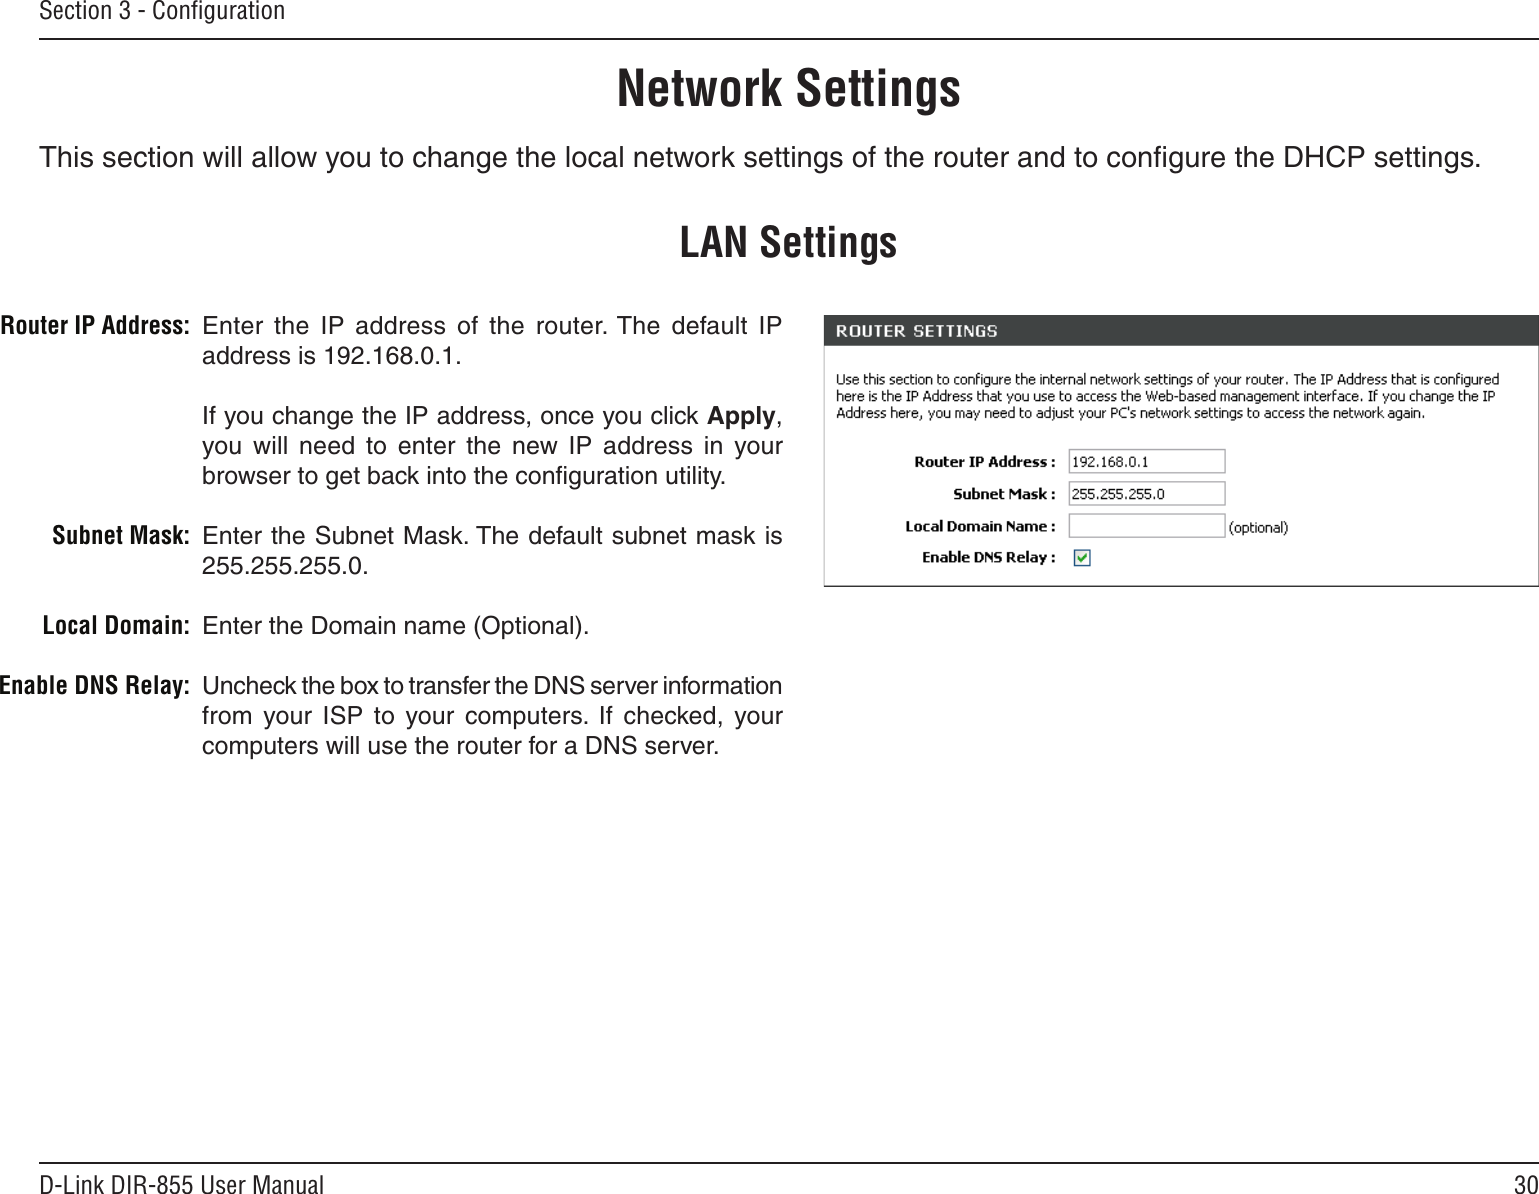 30D-Link DIR-855 User ManualSection 3 - ConﬁgurationThis section will allow you to change the local network settings of the router and to conﬁgure the DHCP settings.Network SettingsEnter  the  IP  address  of  the  router. The  default  IP address is 192.168.0.1.If you change the IP address, once you click Apply, you will  need  to  enter  the  new  IP  address  in  your browser to get back into the conﬁguration utility.Enter the Subnet Mask. The default subnet mask is 255.255.255.0.Enter the Domain name (Optional).Uncheck the box to transfer the DNS server information from  your  ISP  to  your  computers.  If  checked,  your computers will use the router for a DNS server.Router IP Address:Subnet Mask:Local Domain:Enable DNS Relay:LAN Settings